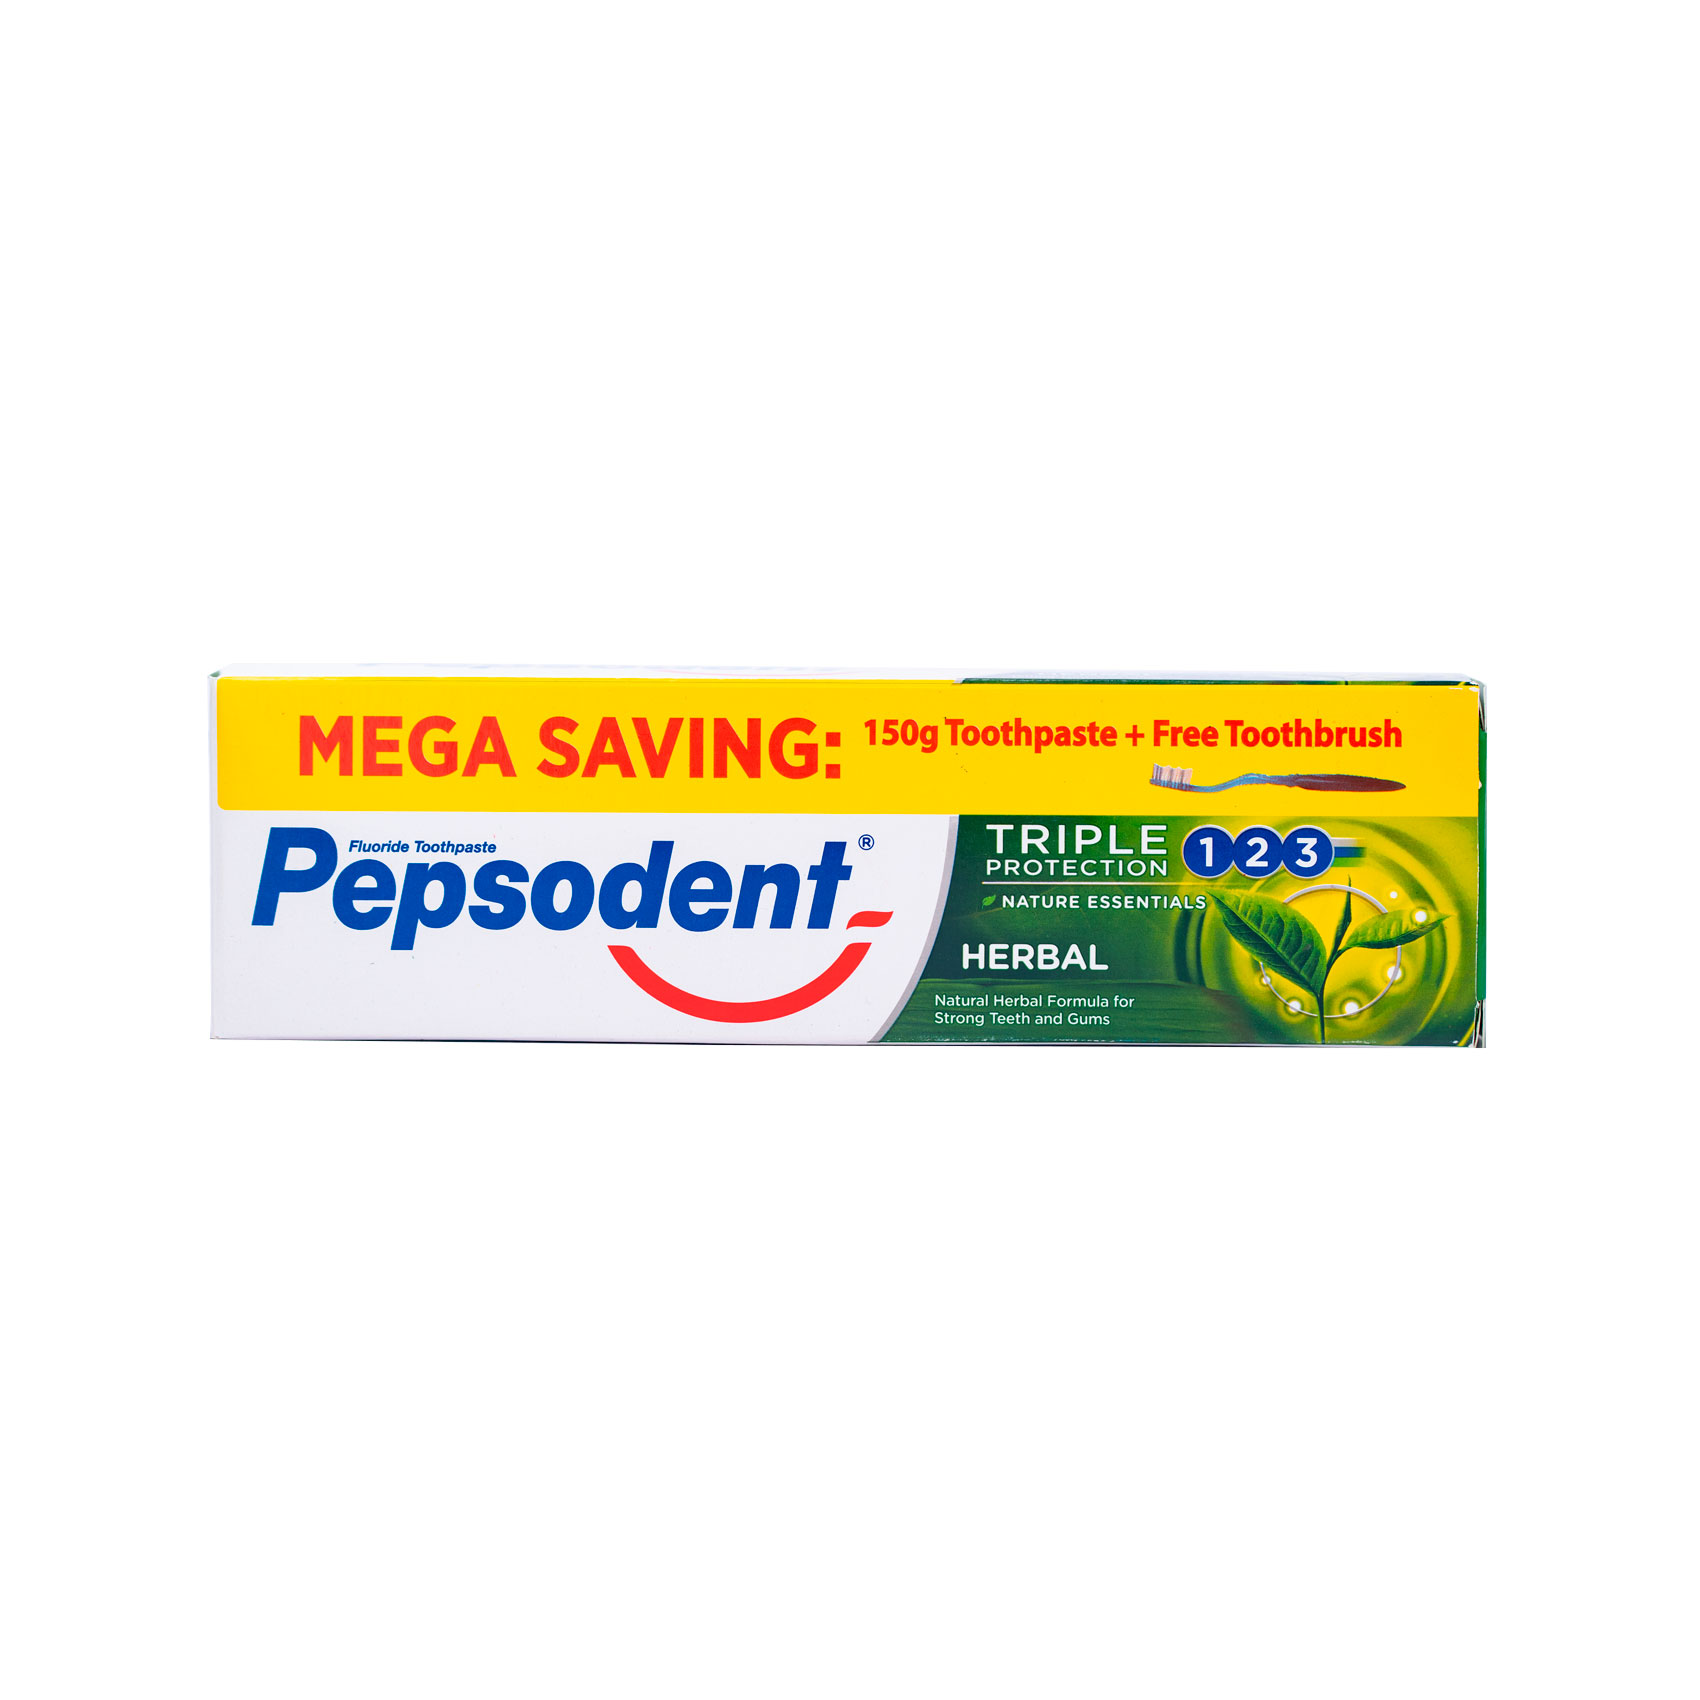 Pepsodent Herbal ToothPaste 150G.